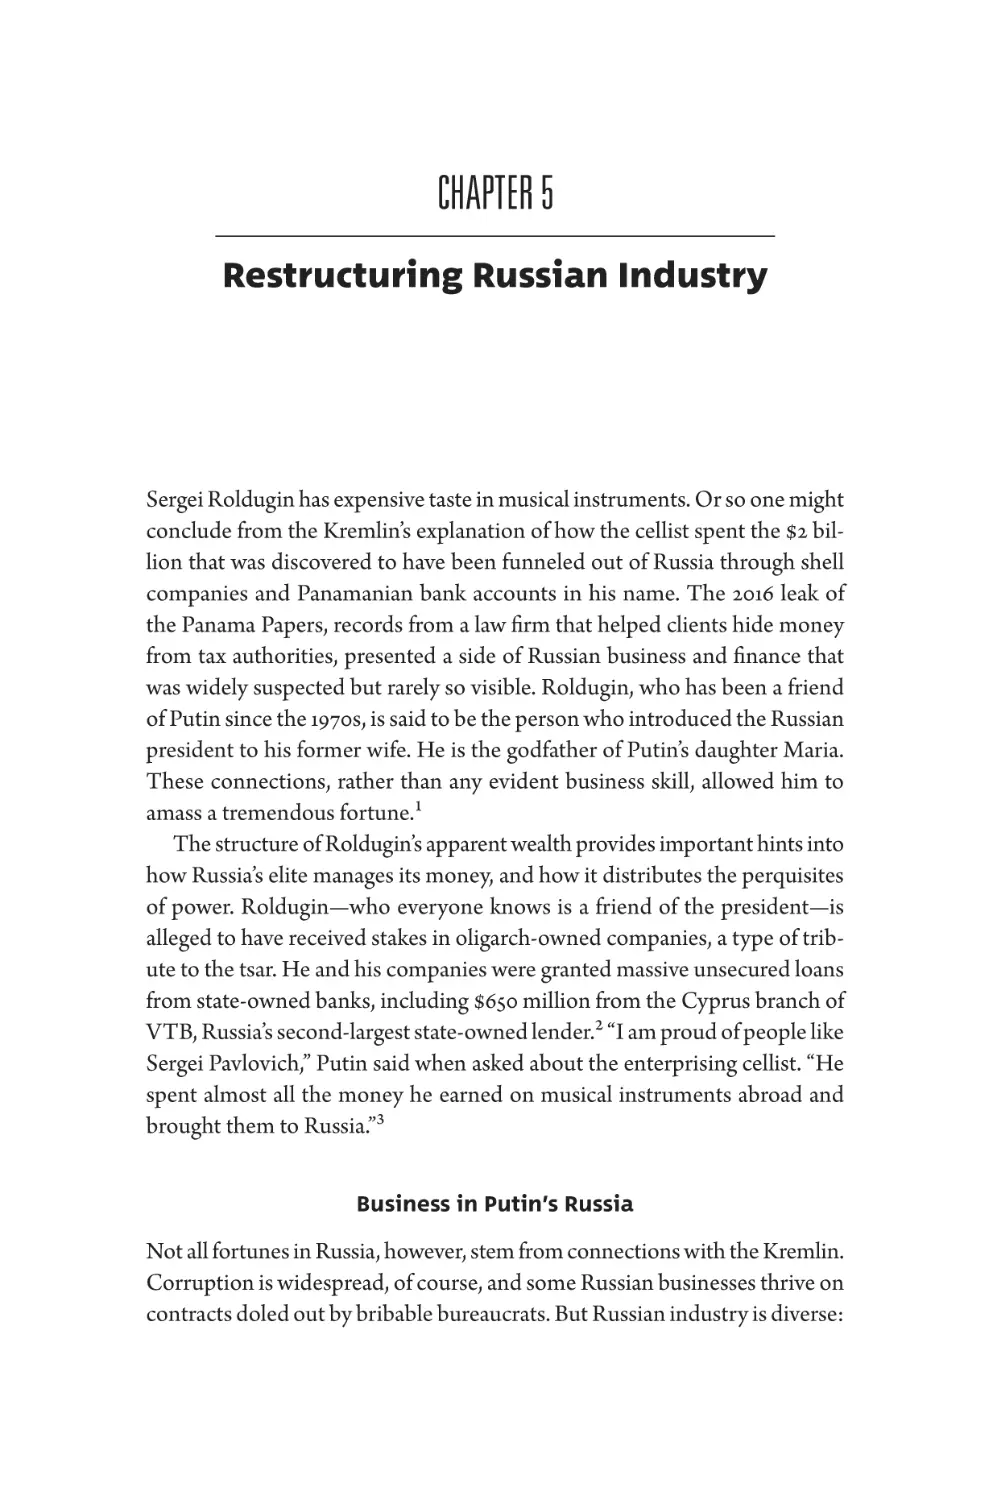 5 Restructuring Russian Industry